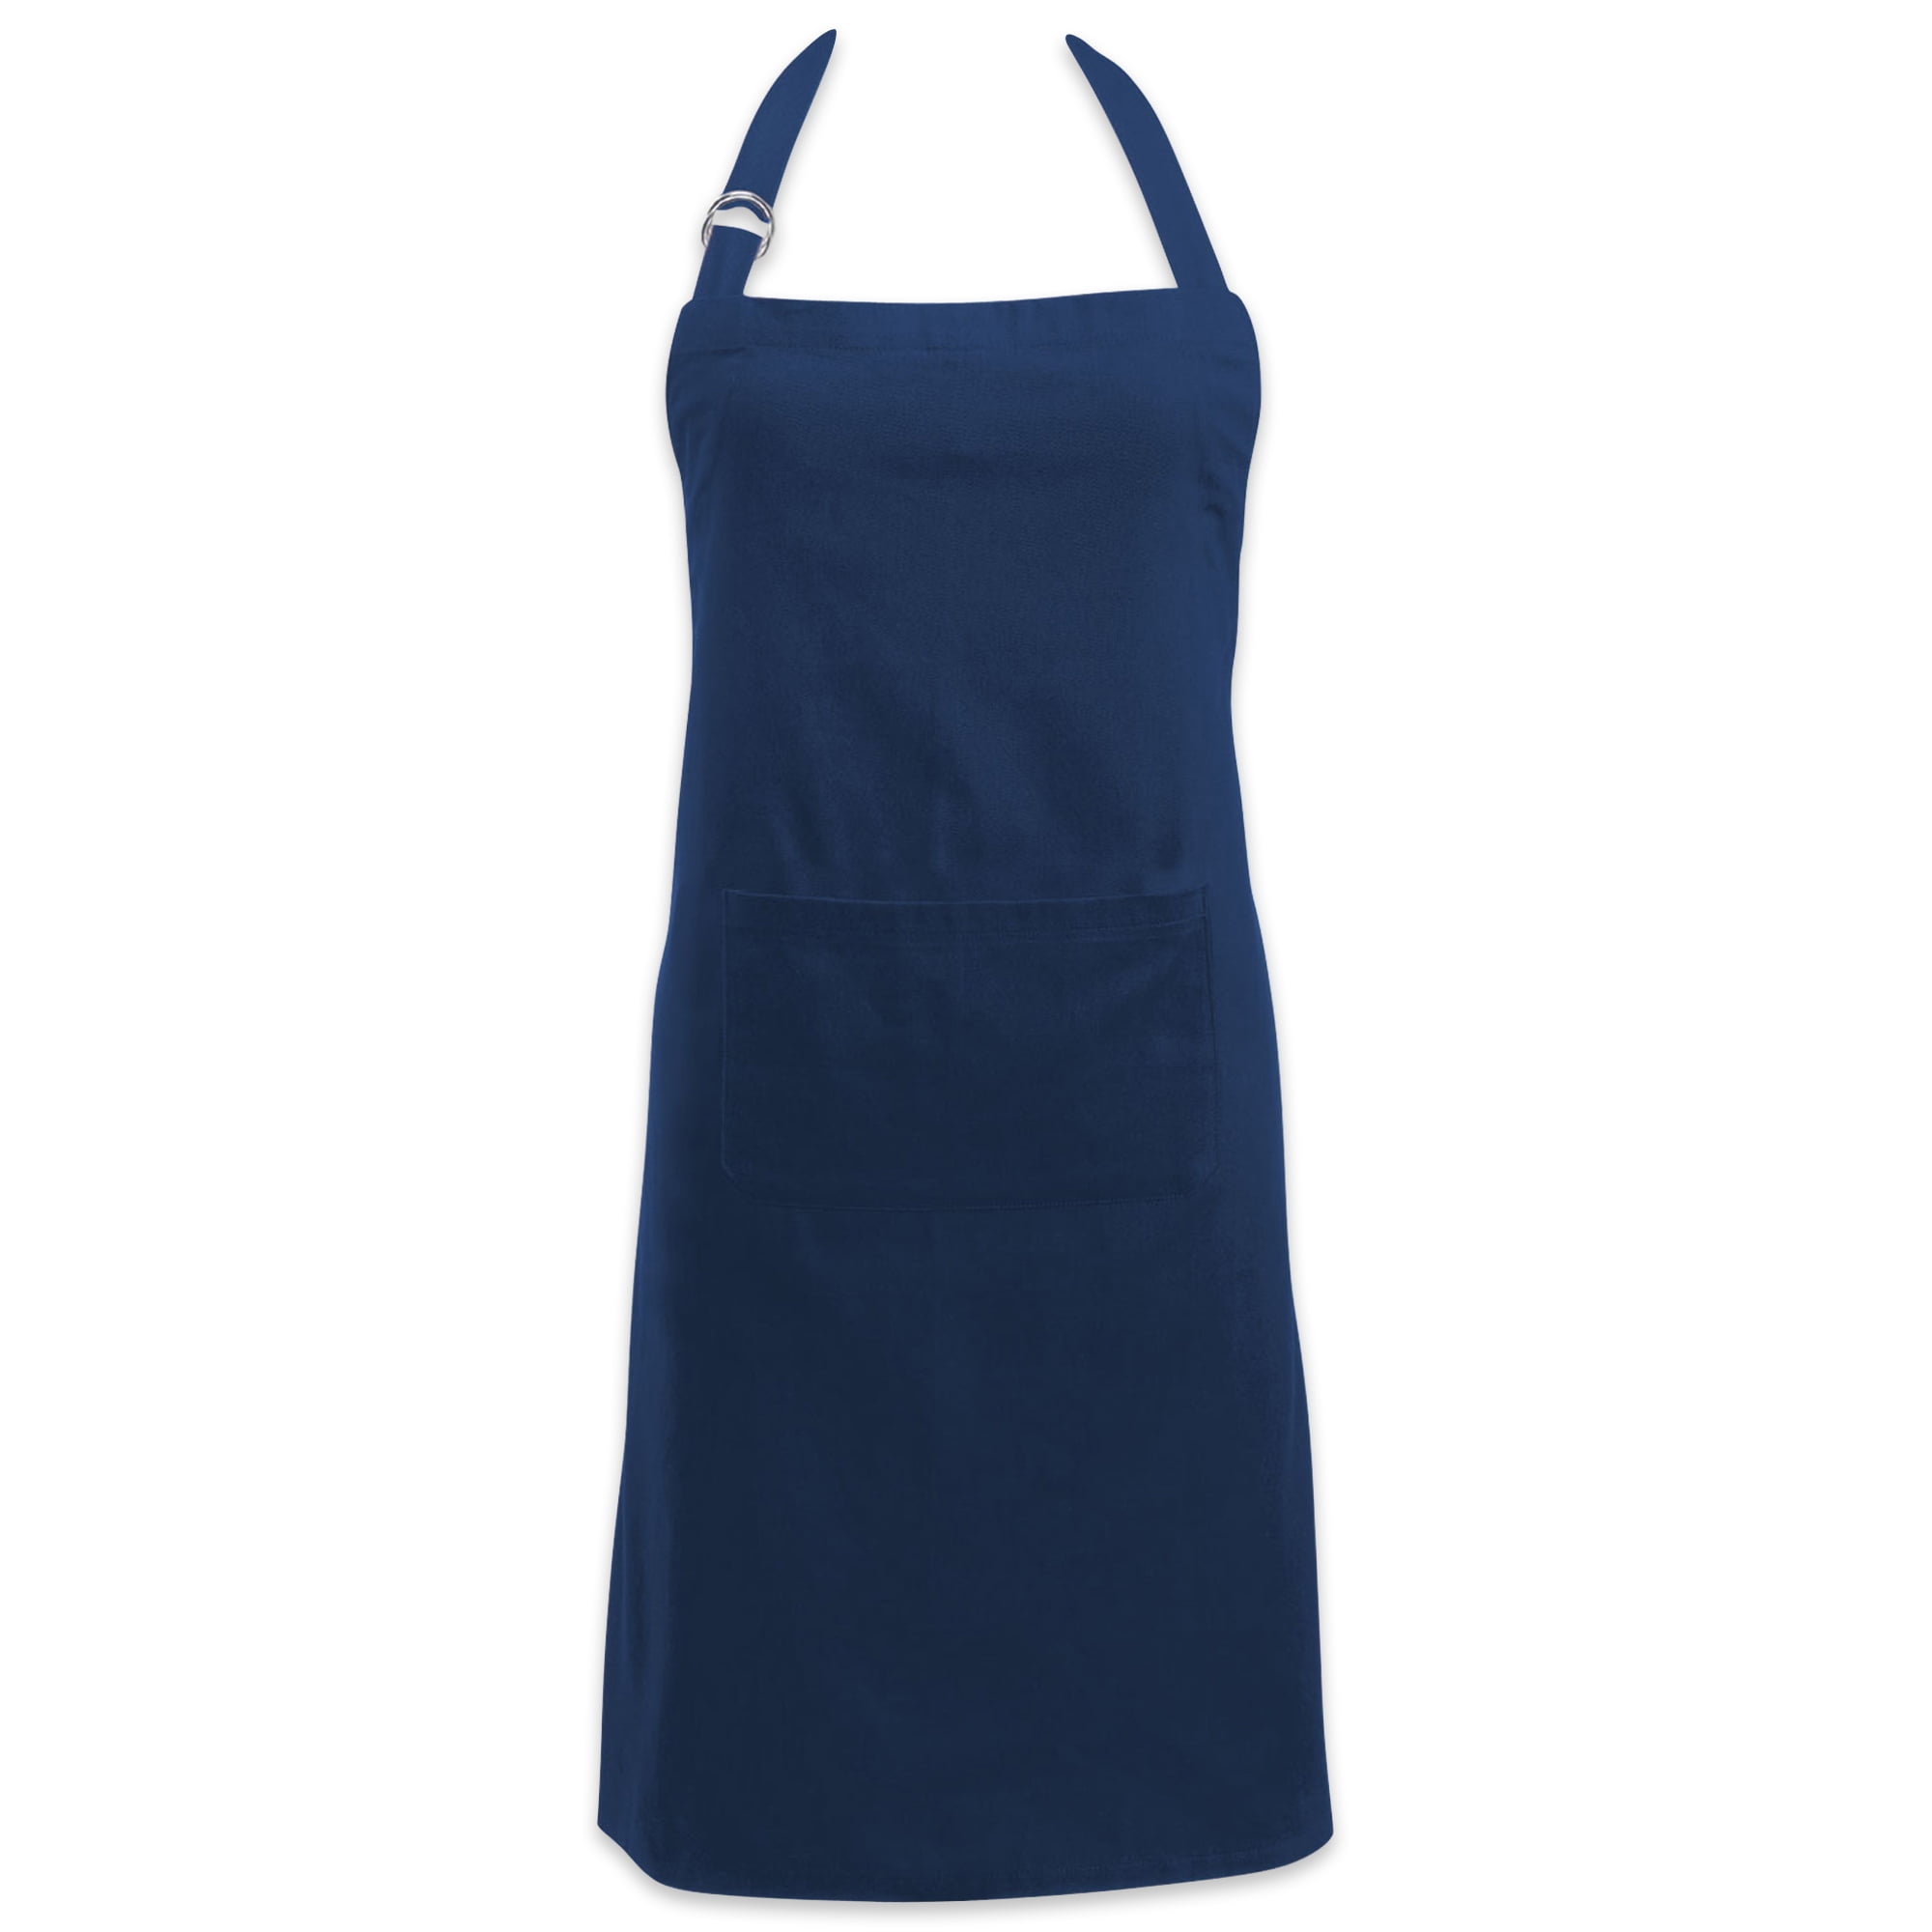 ALL SIZES Easycare tabard Apron with pocket BURGUNDY WITH WHITE BORDER 